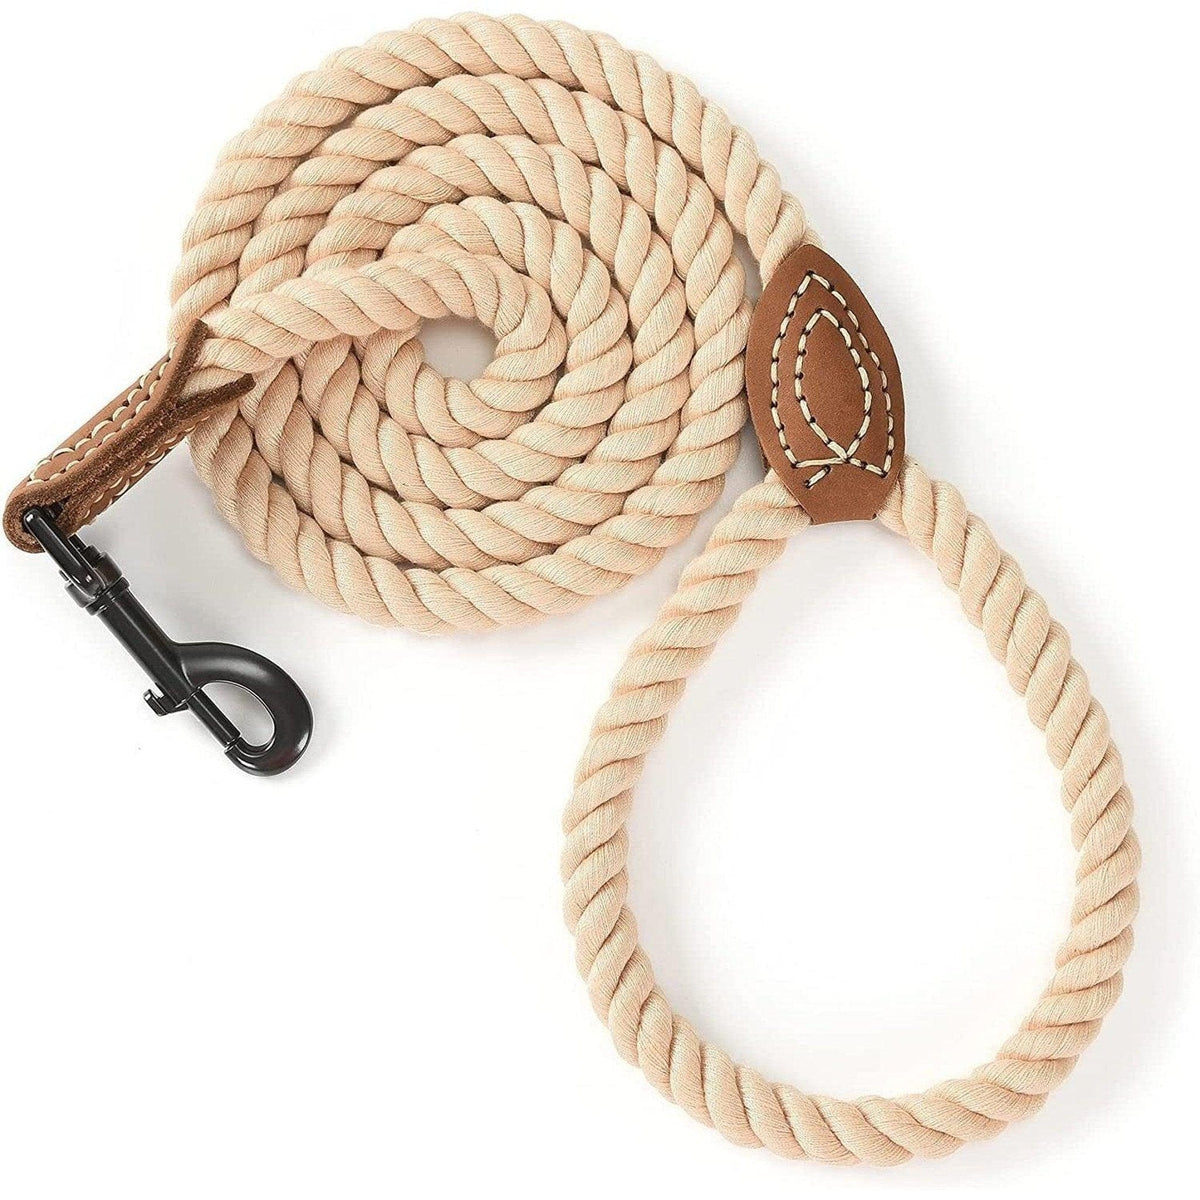 A 🐶 Elegant Cotton Braided Rope Dog Leash 🪢 with a leather strap from Pets Paradise.